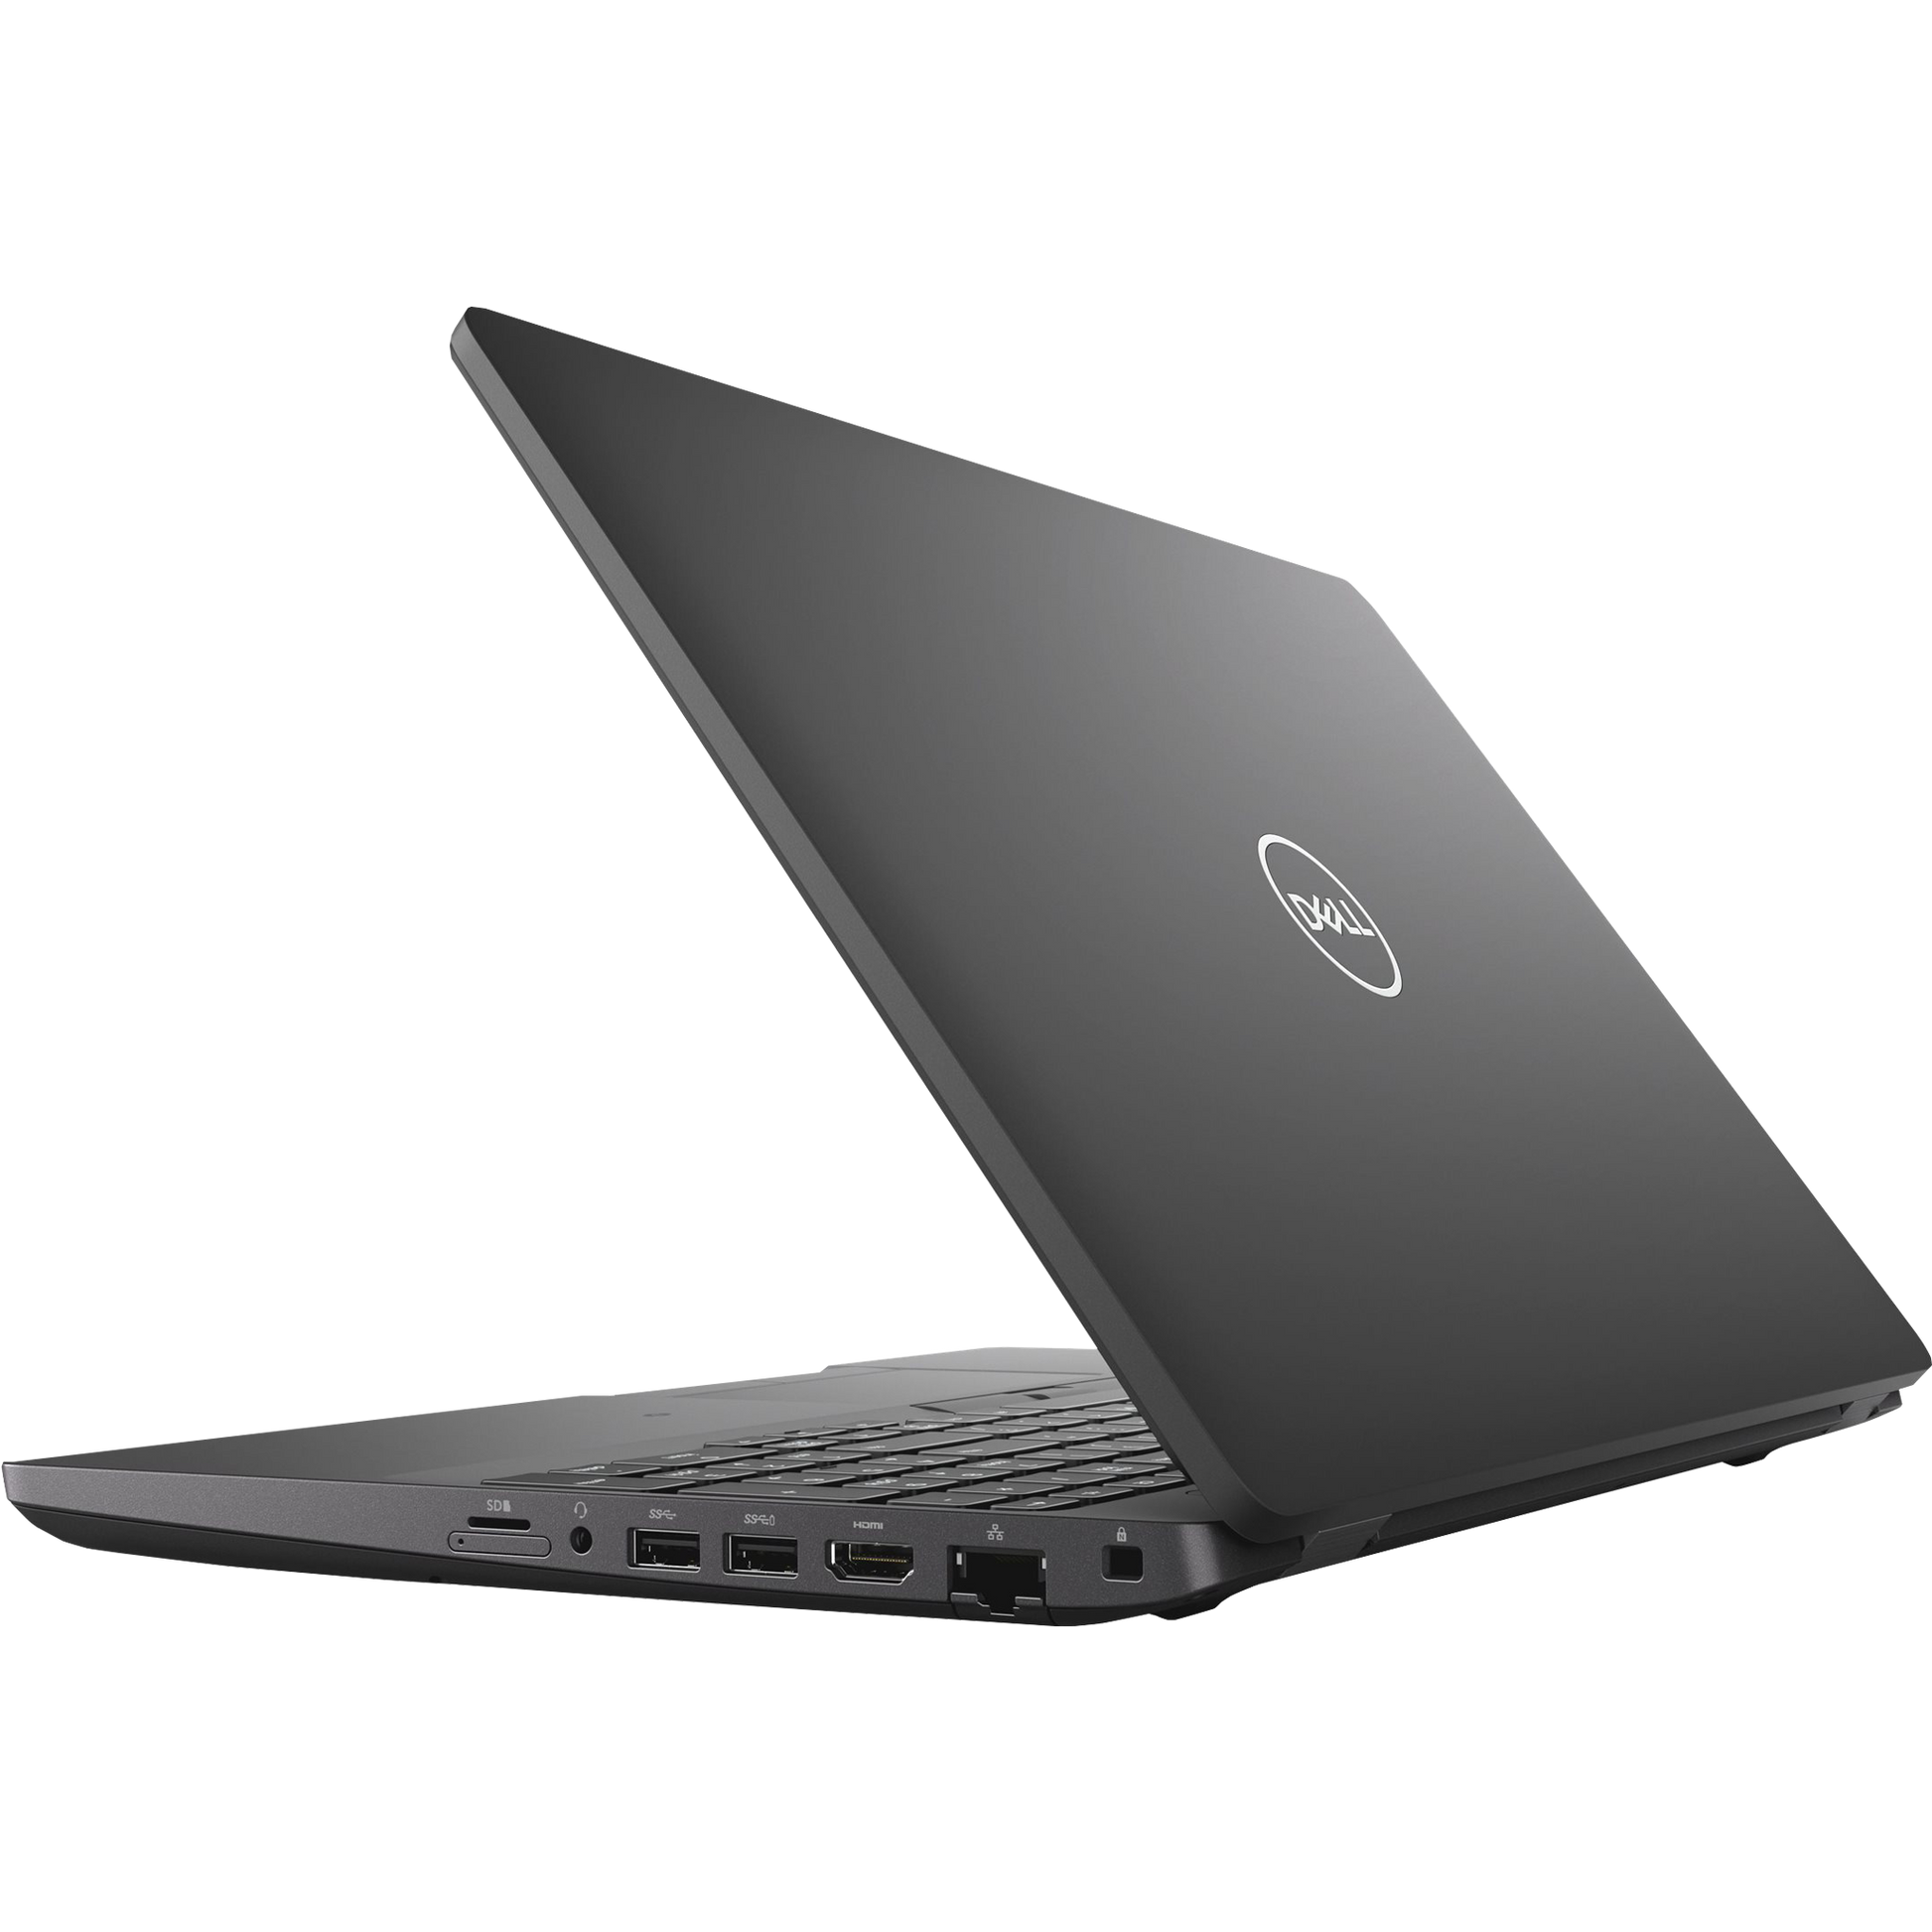 Dell Latitude 5501 Intel i7, 9th Gen Touch Screen Laptop with 16GB + Win 11 Laptops - Refurbished